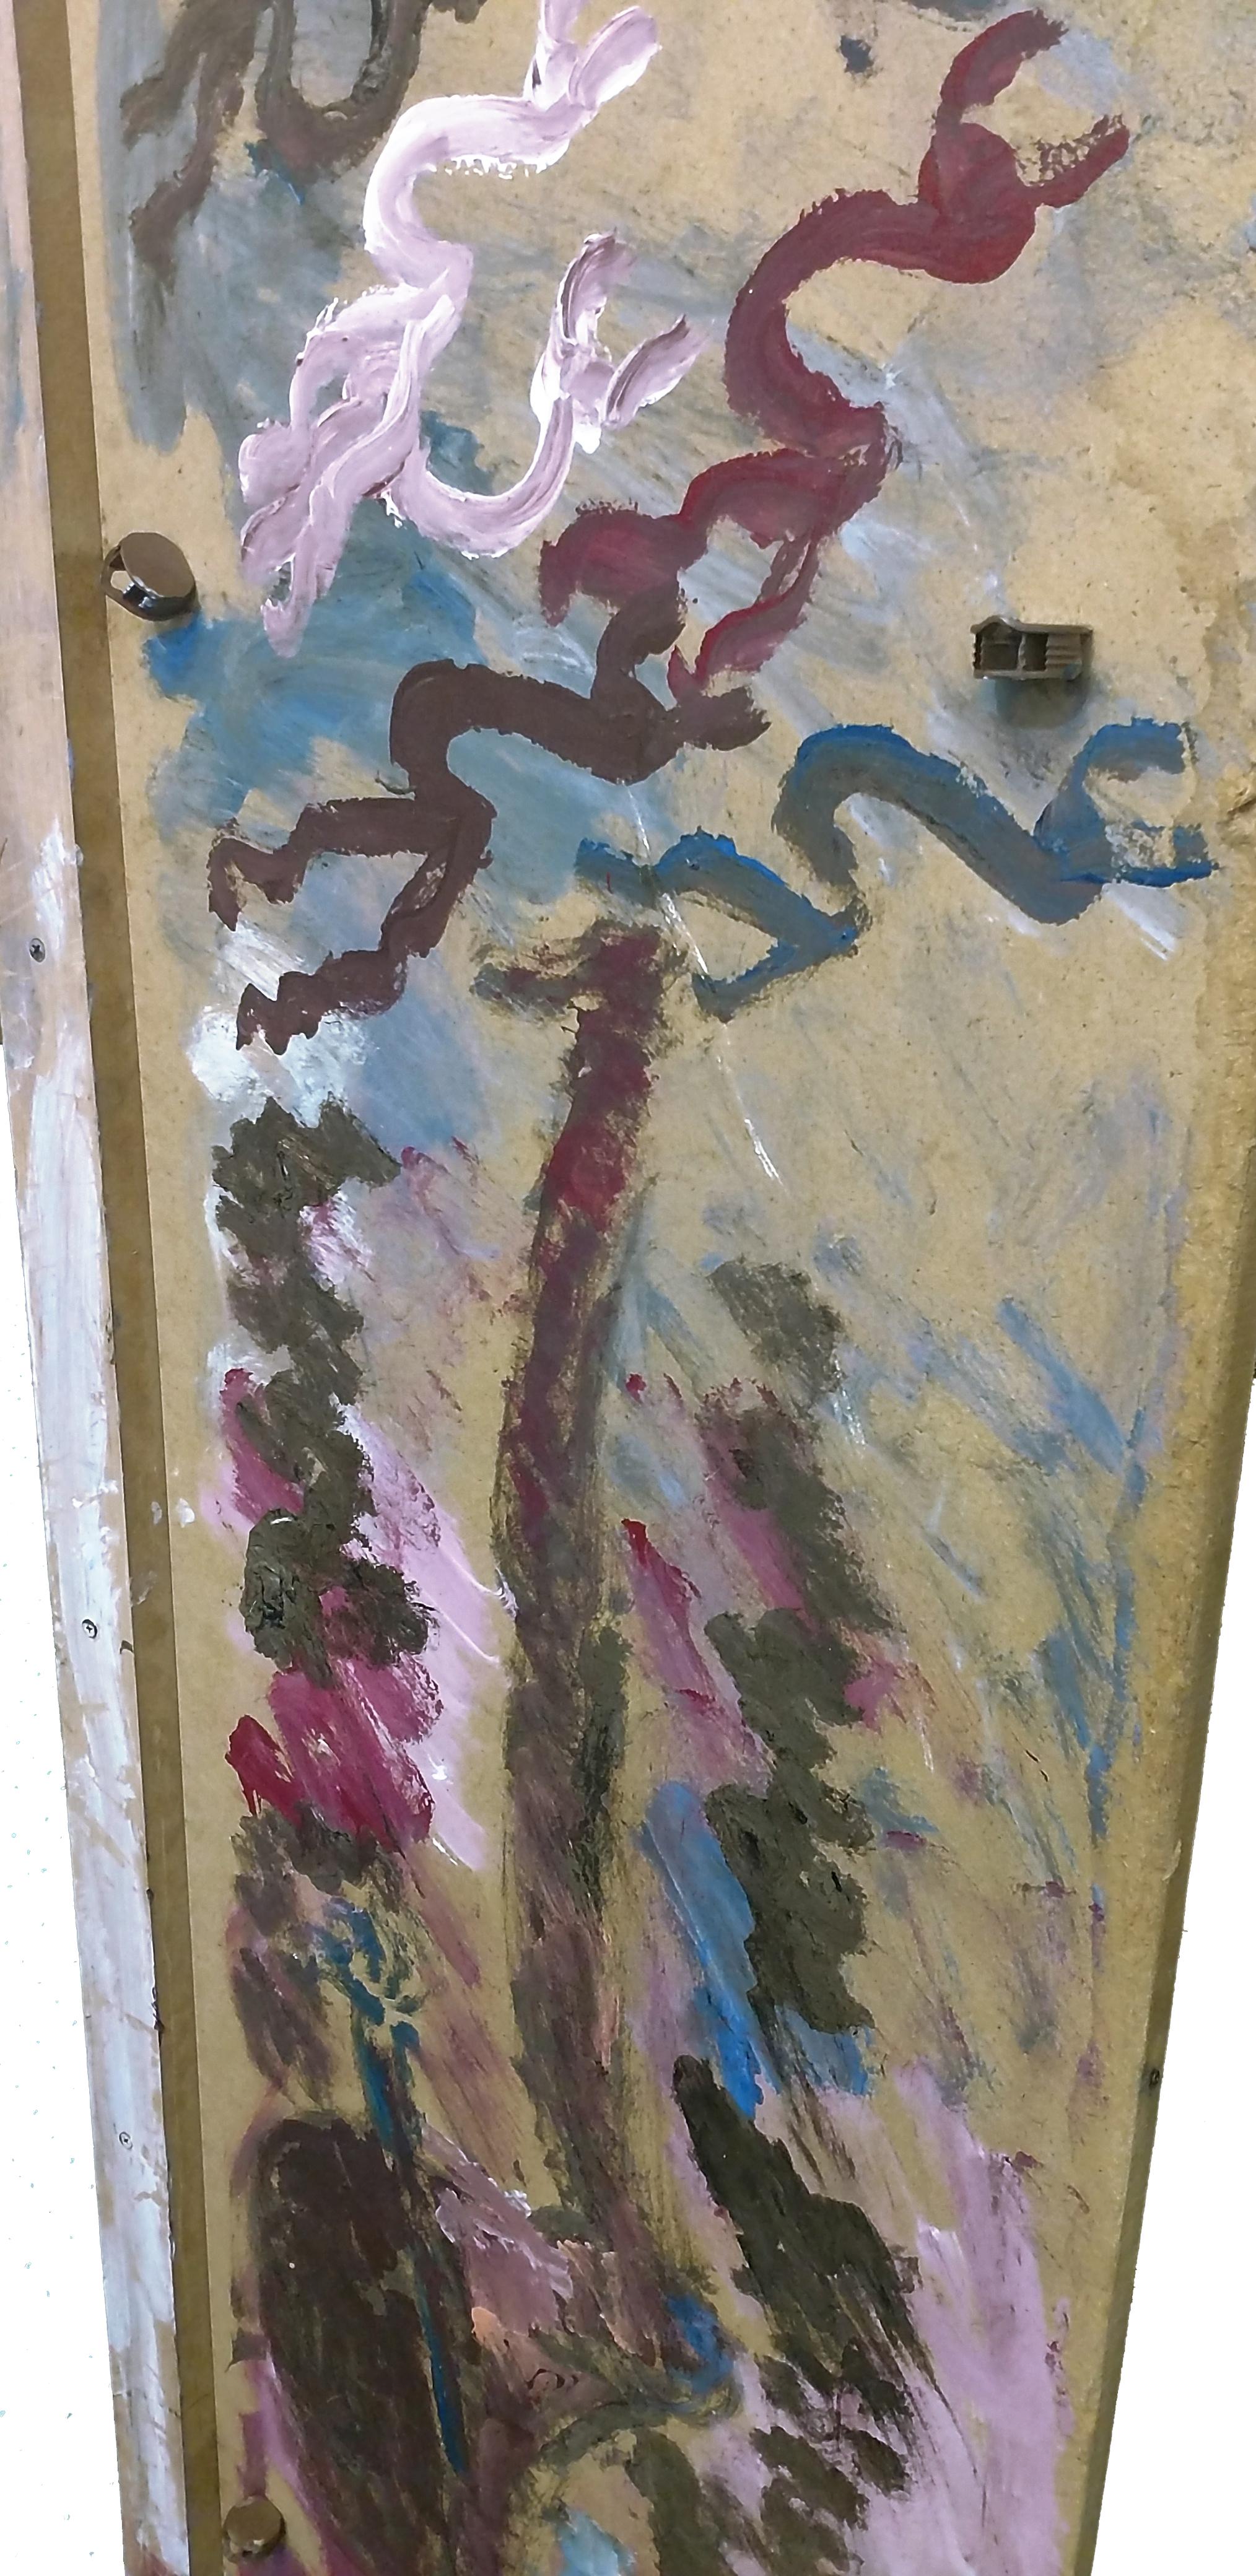 FERTILITY IV (PAINTING ON WOOD) - Painting by Purvis Young